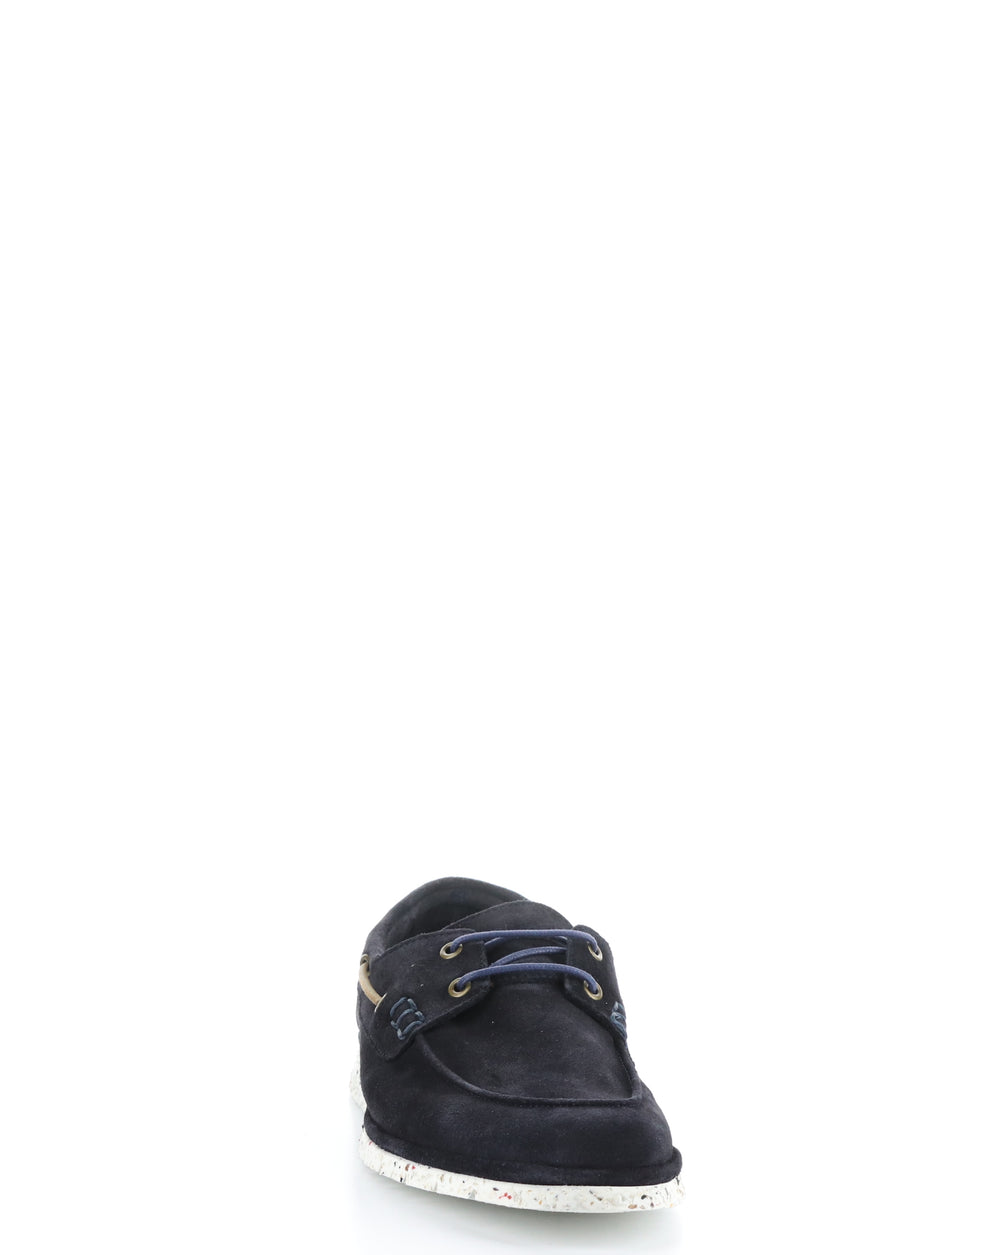 11910 NAVY Round Toe Shoes